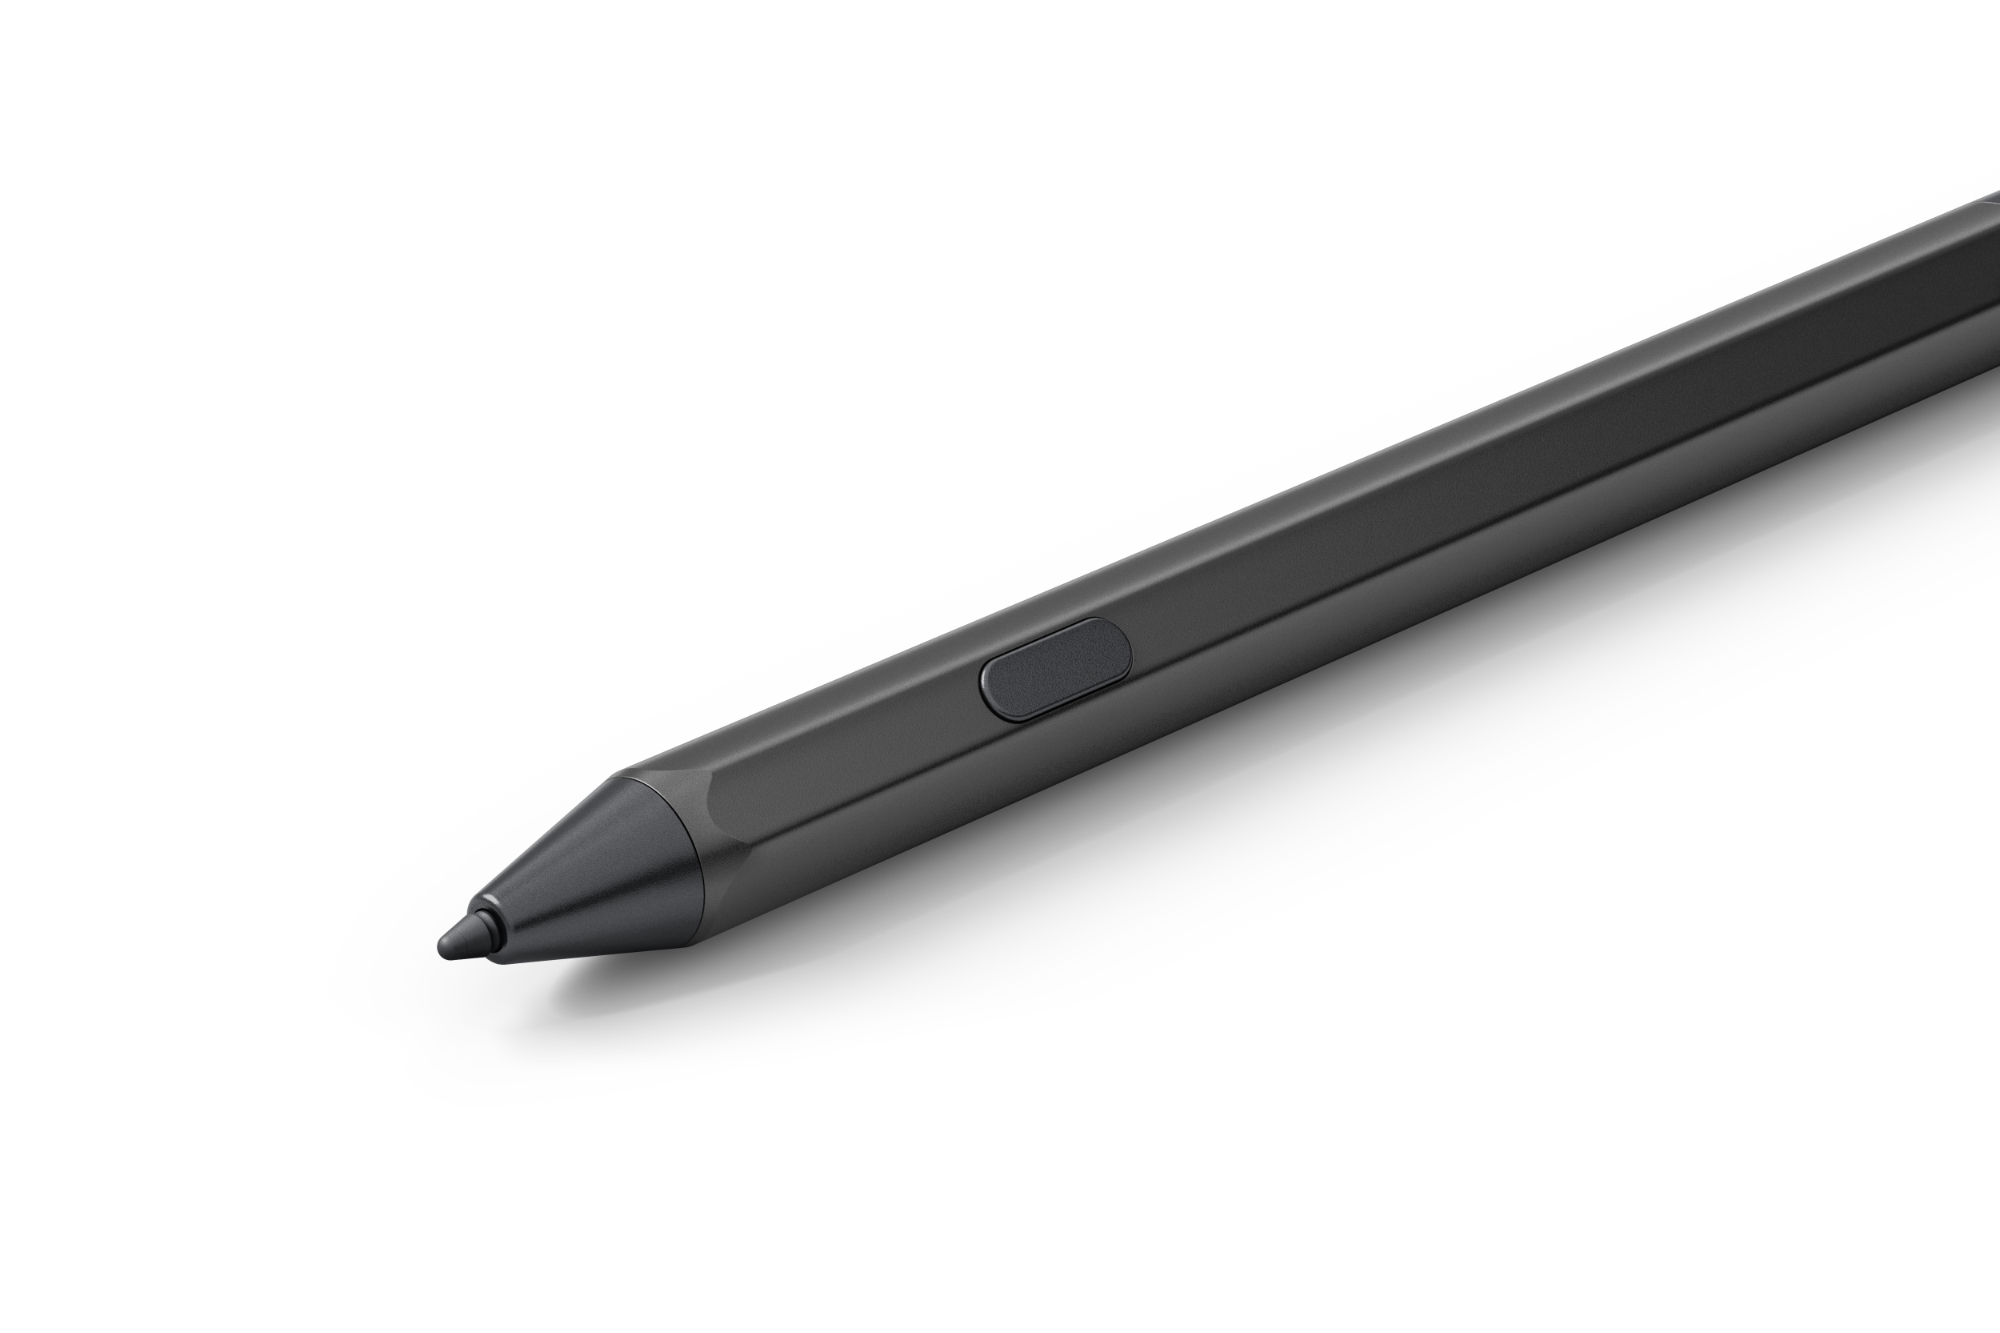 Pen accessory for Amazon Fire Max 11 tablet.